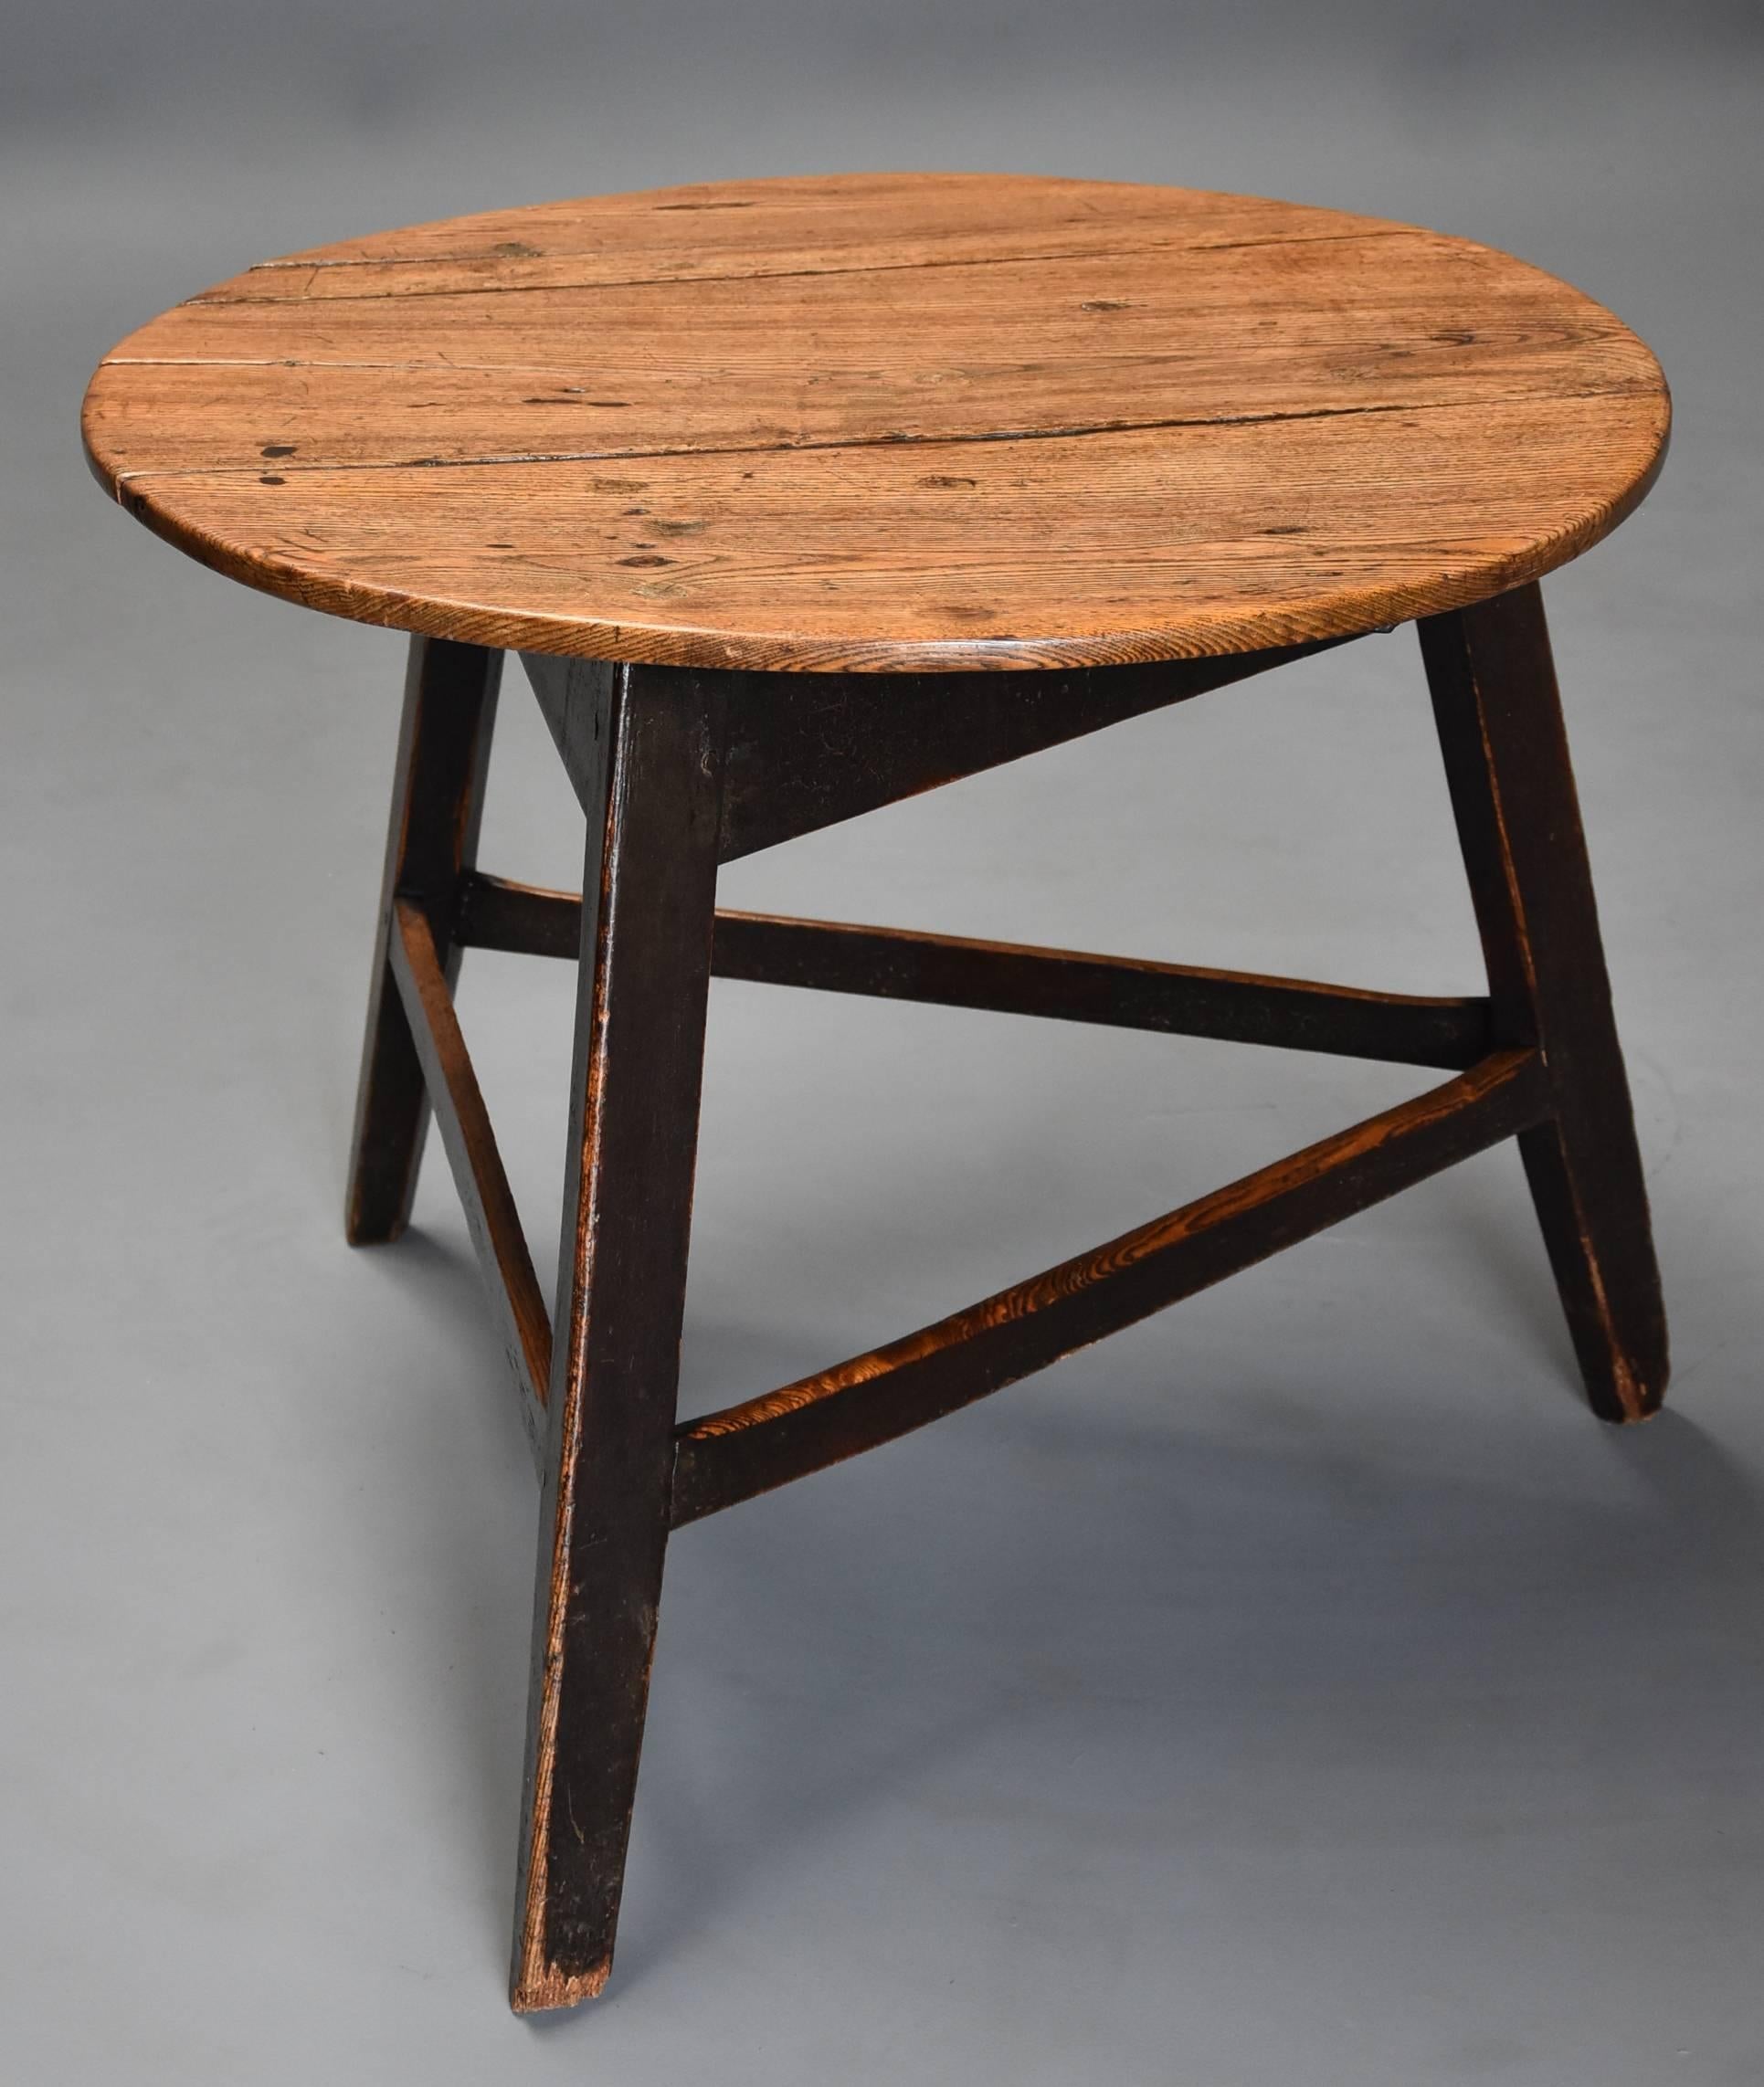 English Mid-19th Century Ash Cricket Table with Original Painted Base